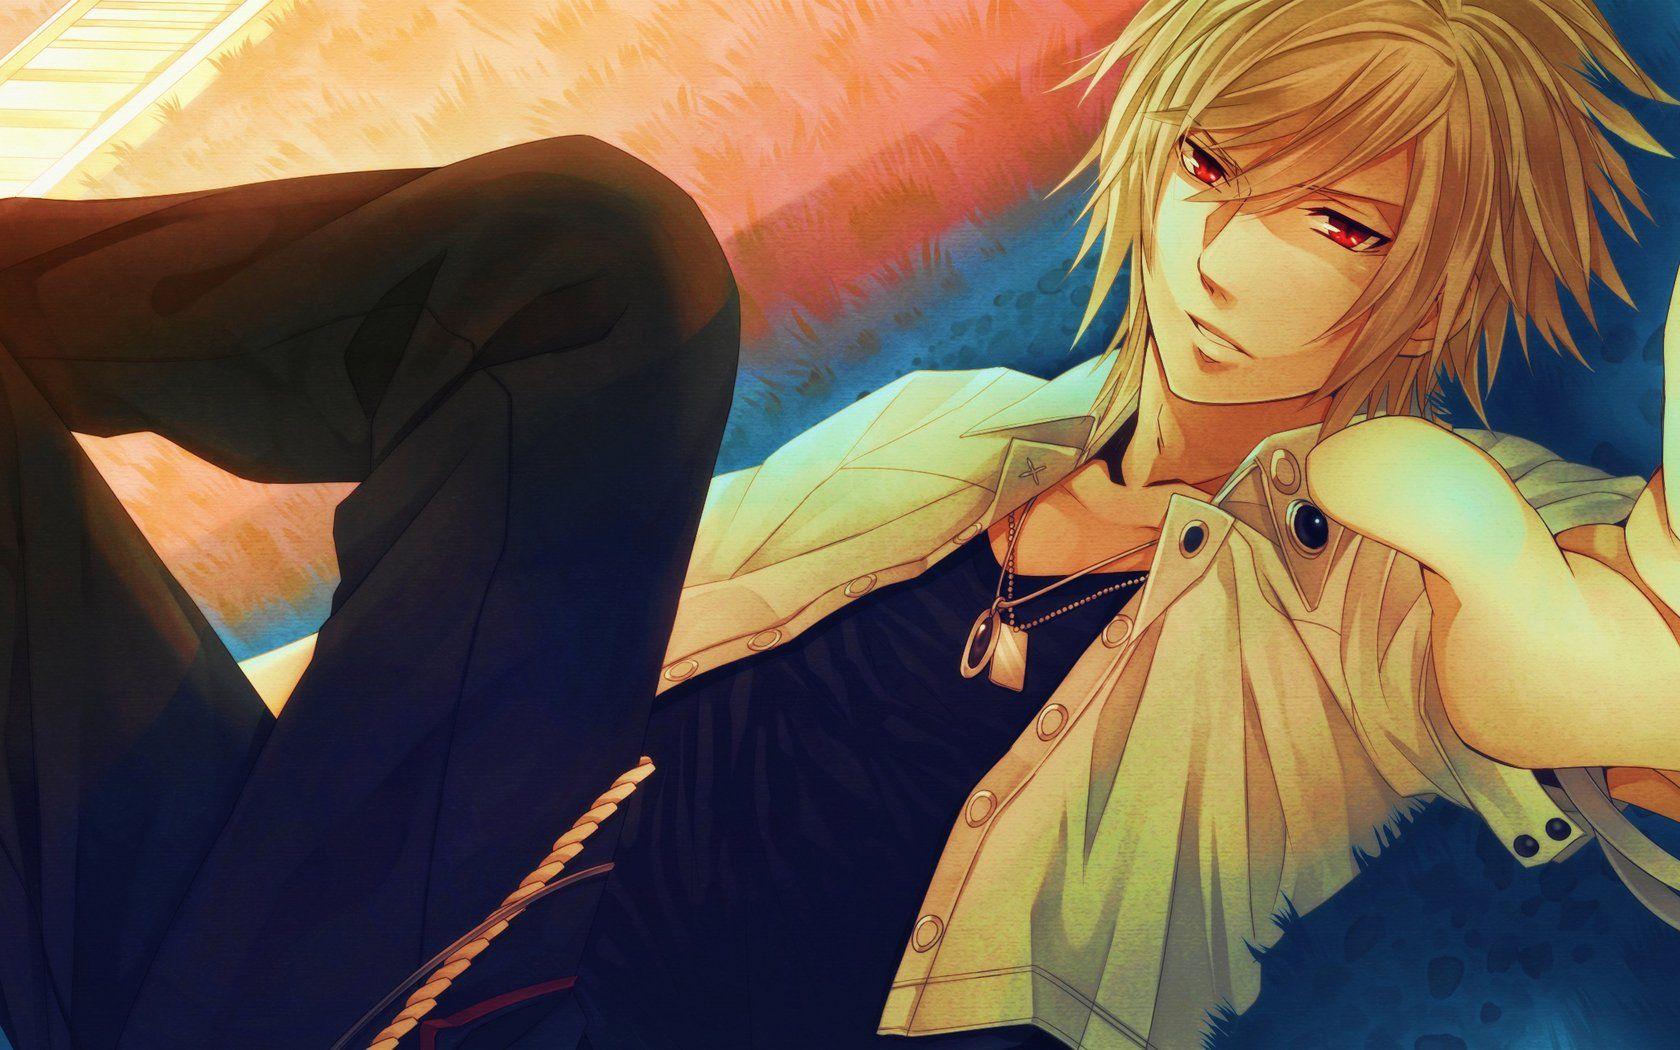 Guy red eyes chain is anime boy blond hair wallpaper